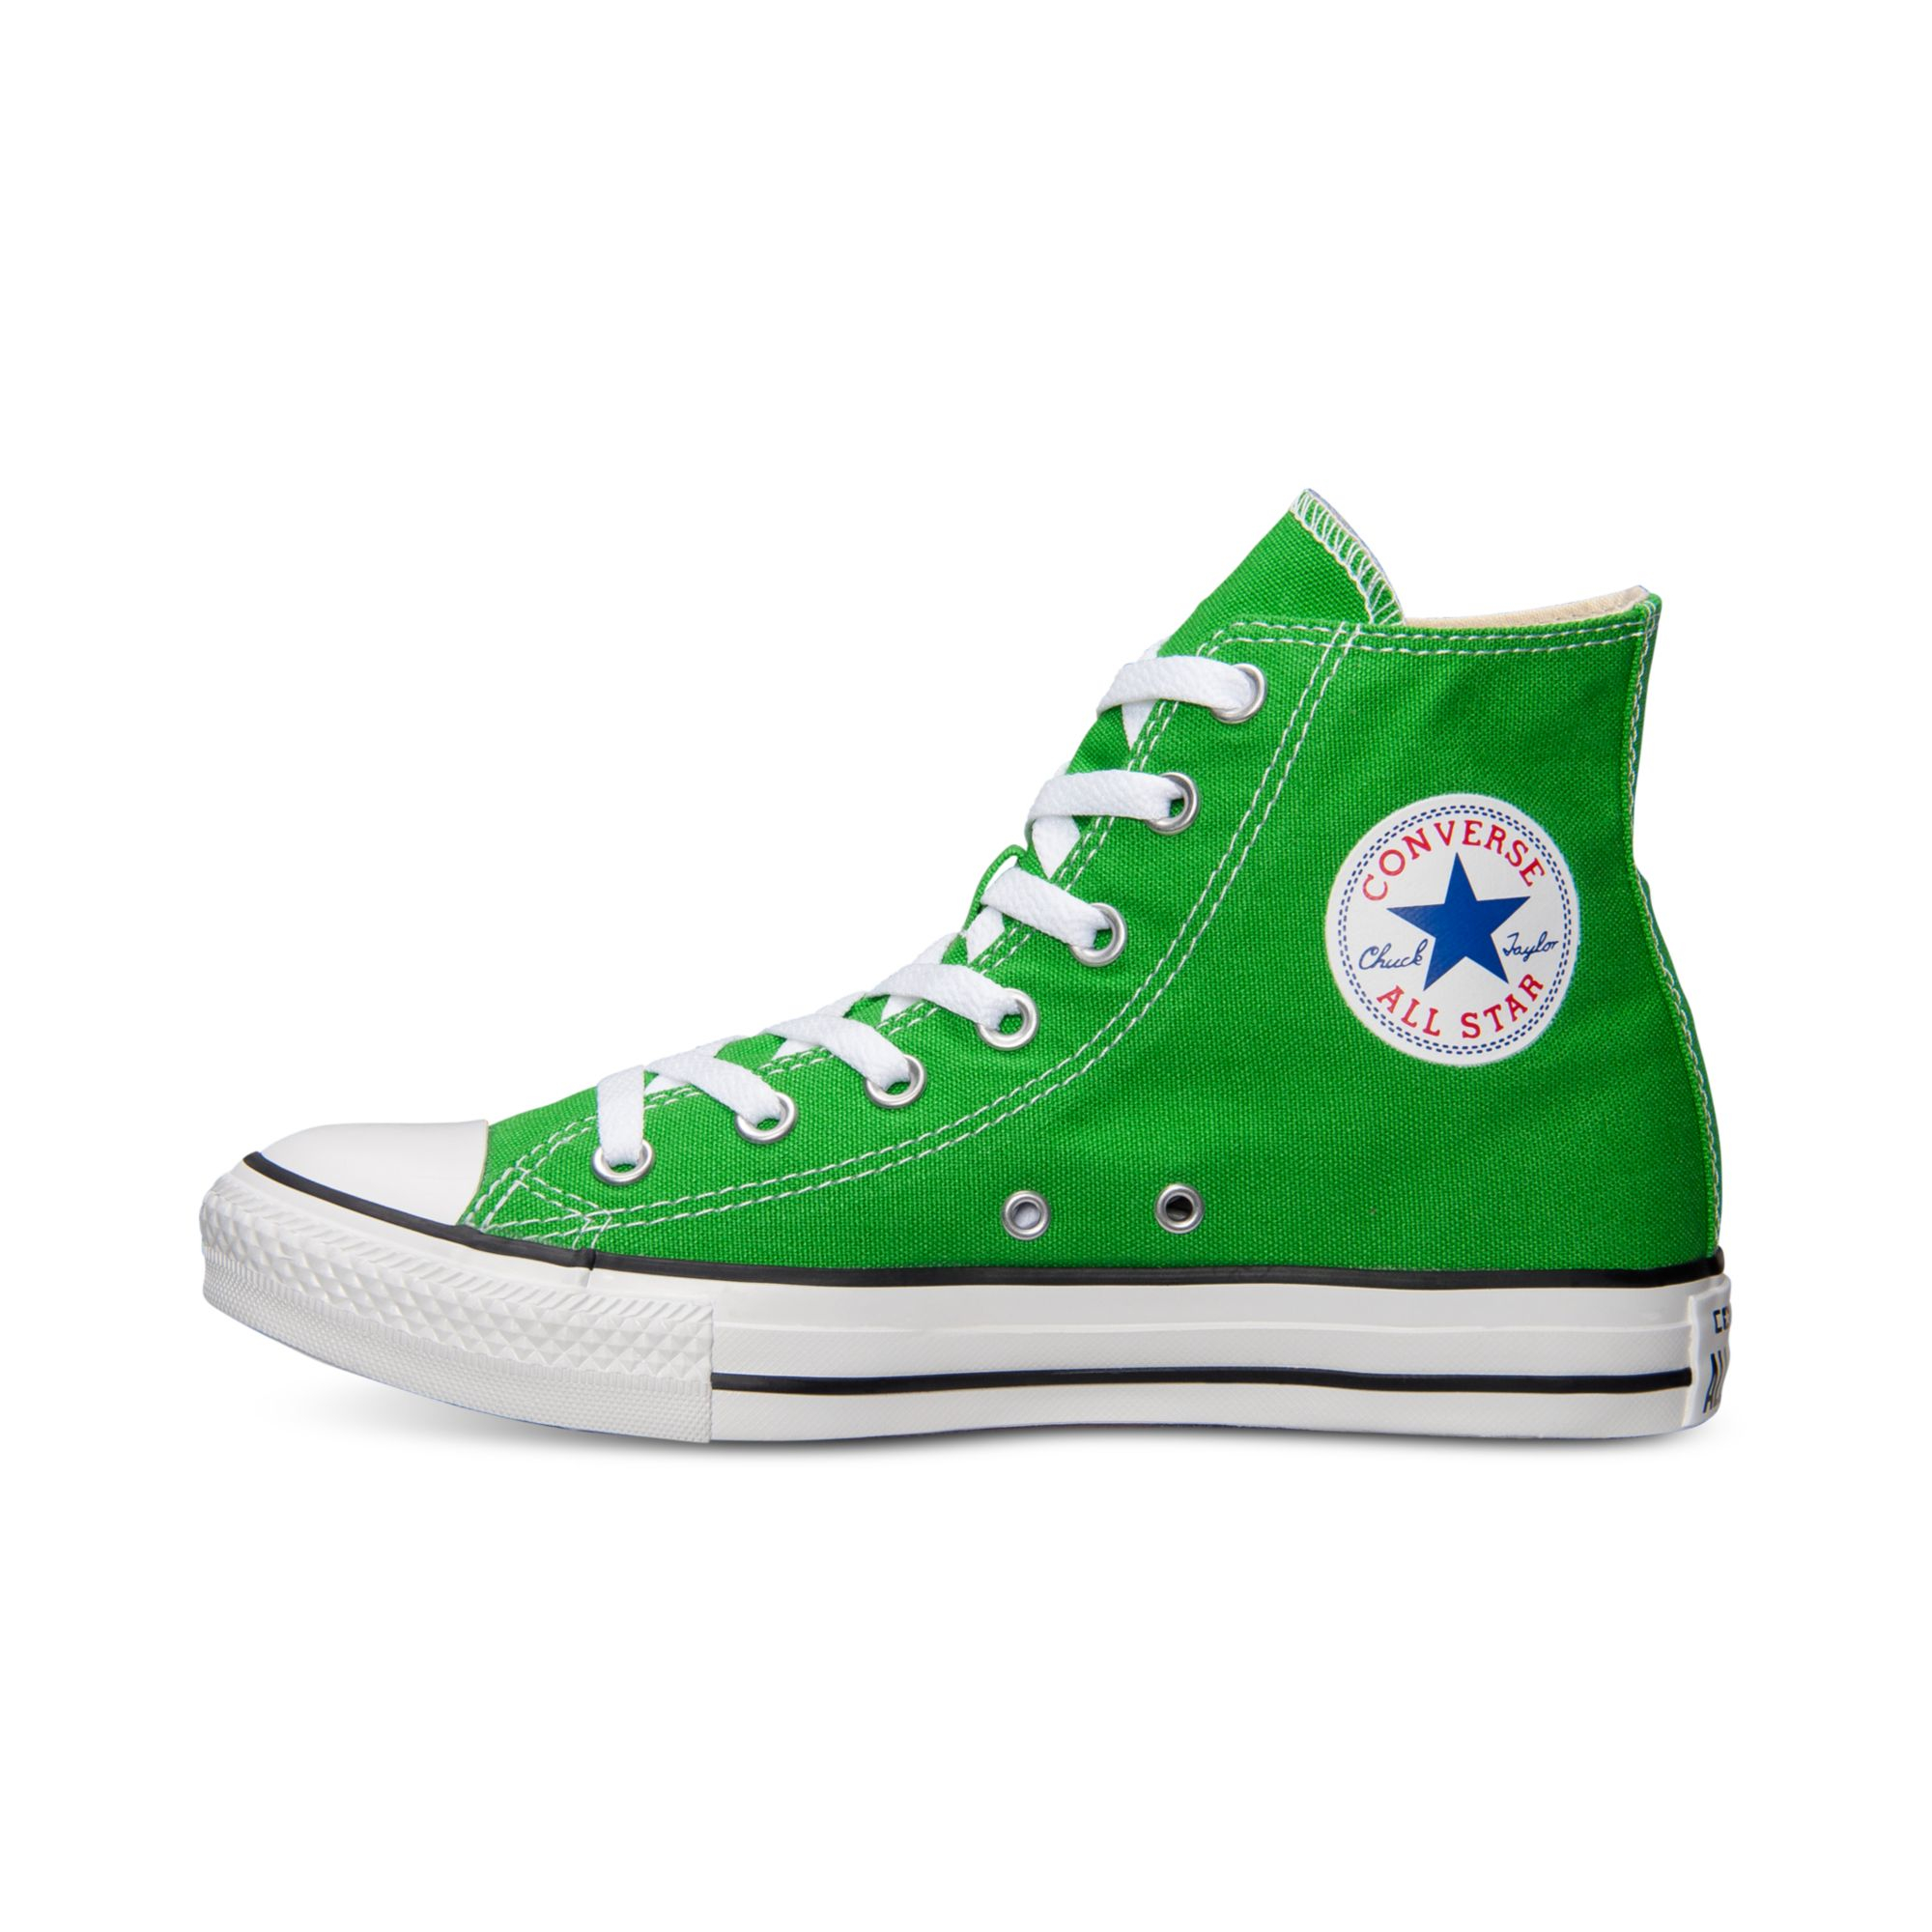 Lyst - Converse Mens Chuck Taylor High Top Casual Sneakers From Finish Line in Green for Men